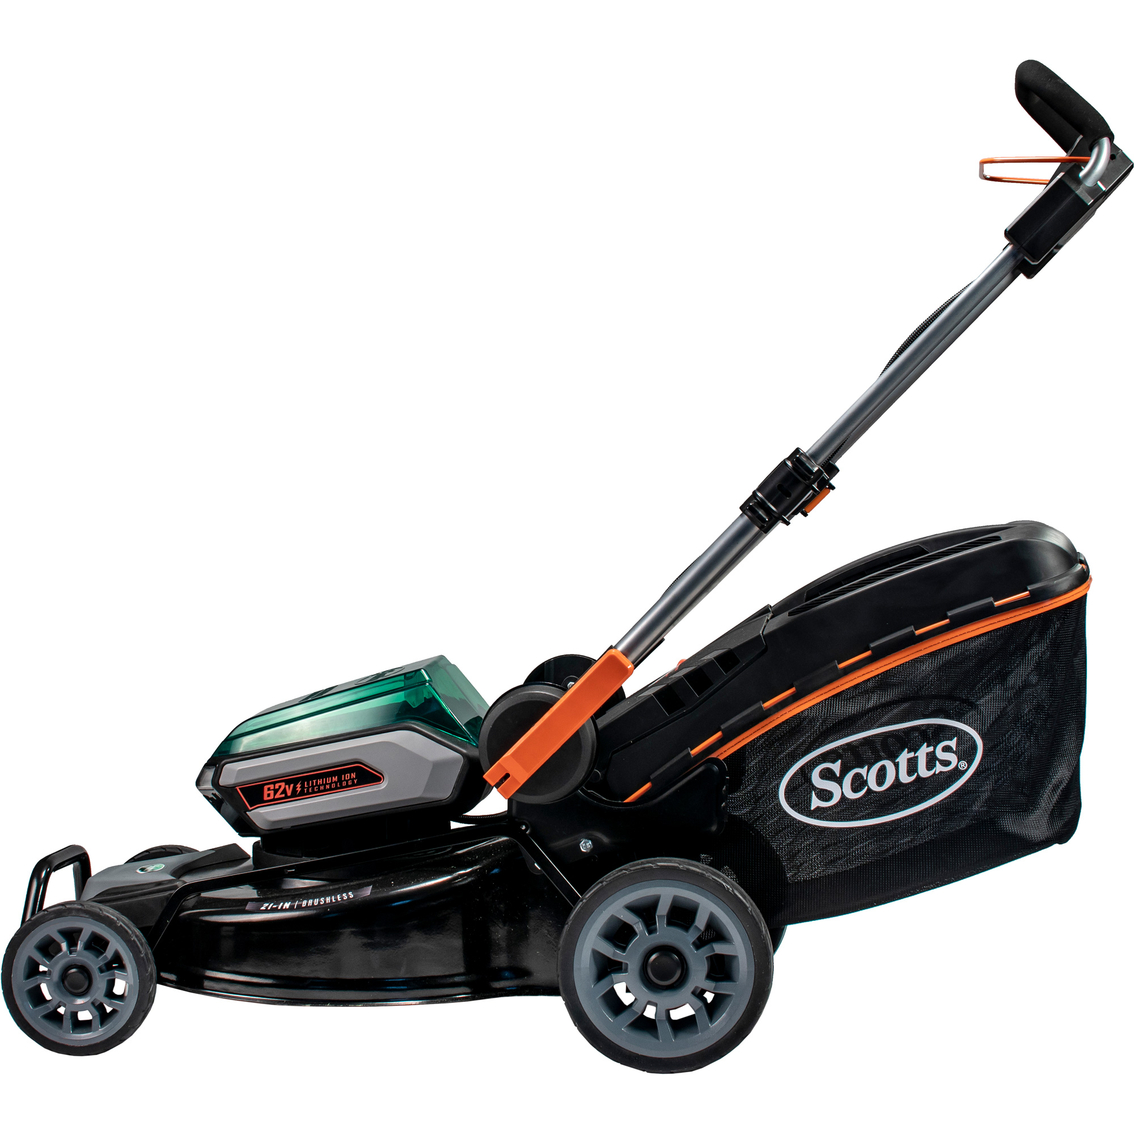 American Lawn Mower Scotts 62V 21 in. Lithium Ion Cordless Electric Lawnmower.. - Image 5 of 10